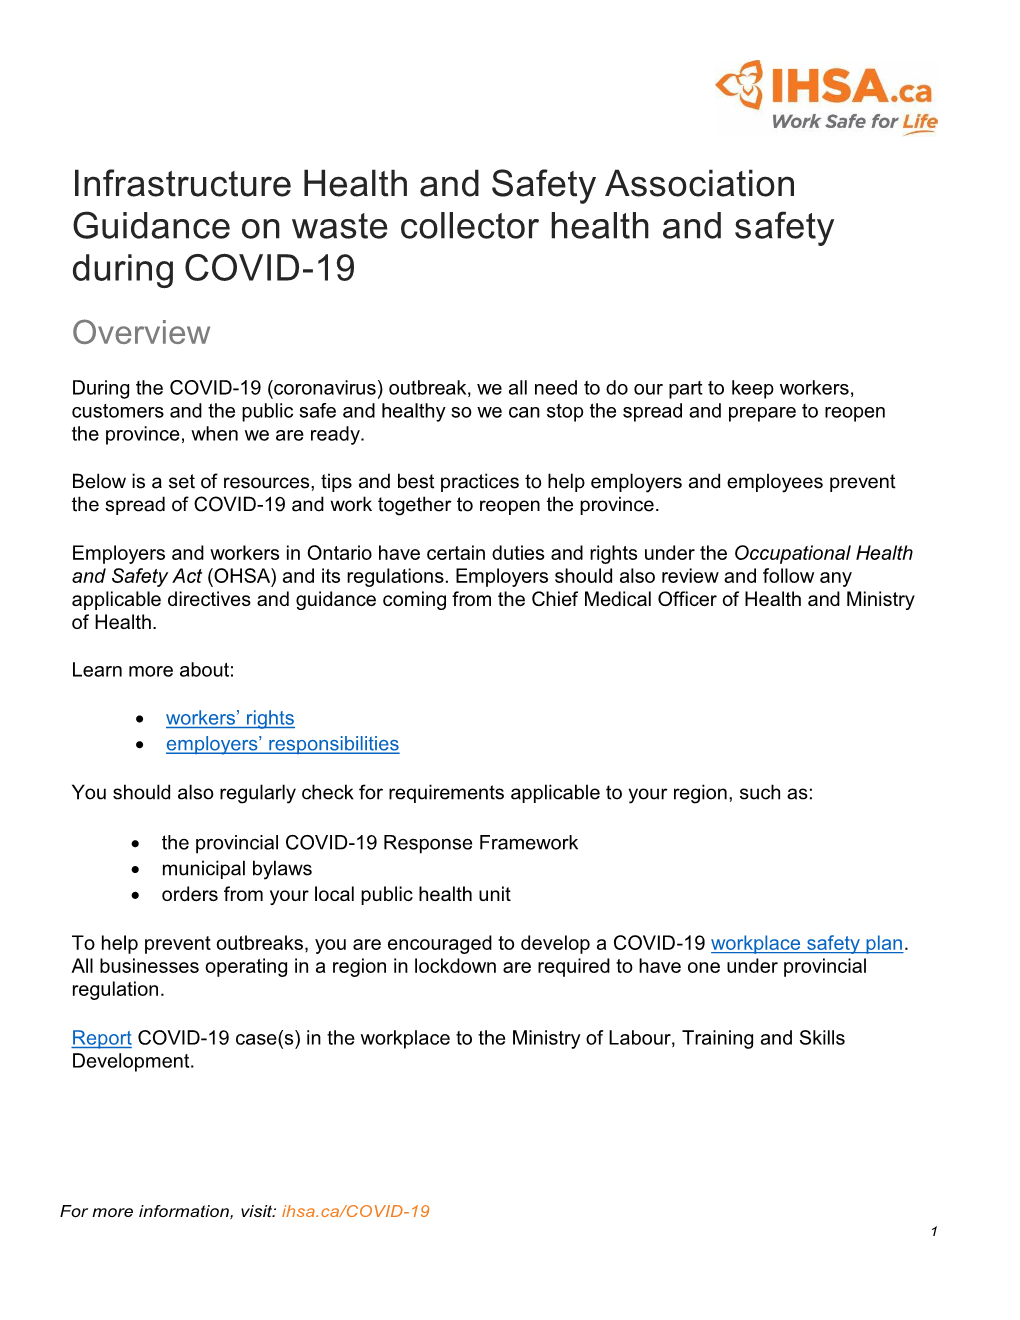 Guidance on Waste Collector Health and Safety During COVID-19